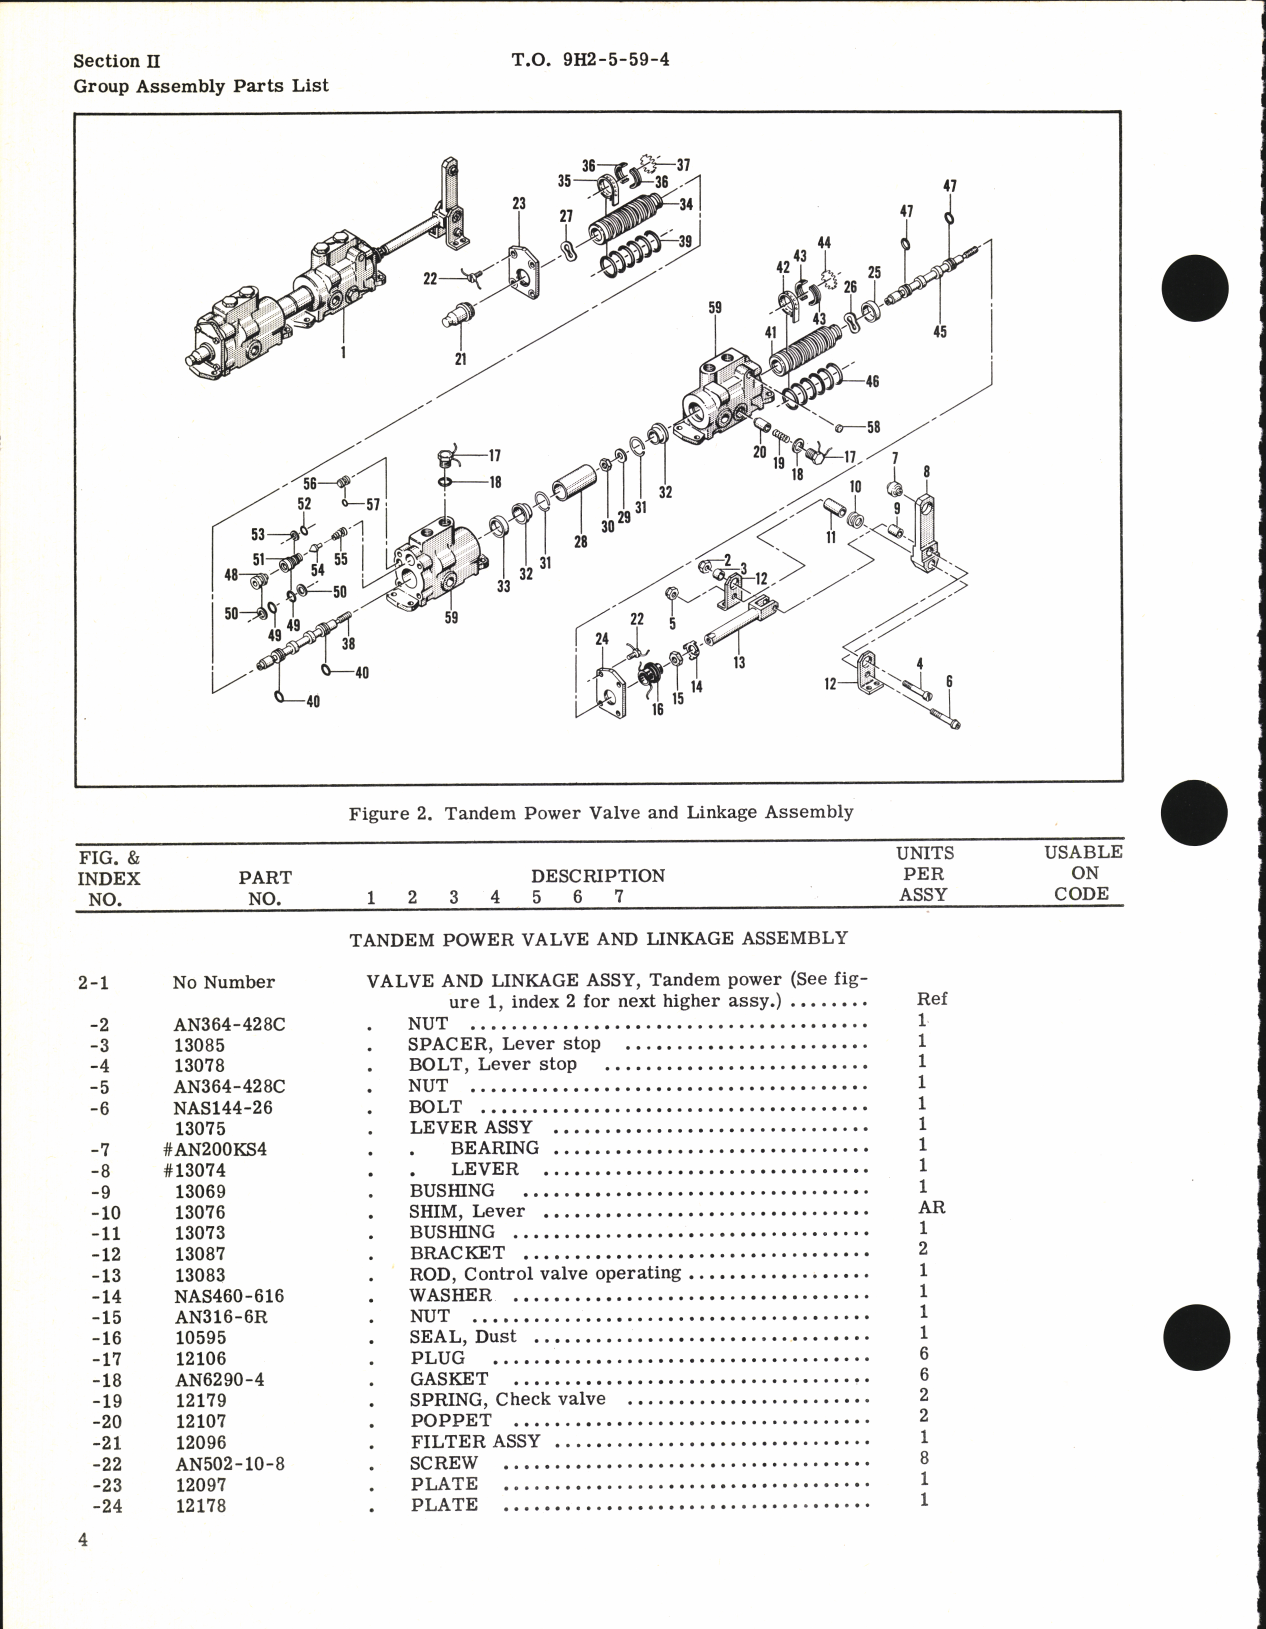 Sample page 6 from AirCorps Library document: Illustrated Parts Breakdown for Hydraulic Tandem Power Cylinder Part No. 11590-6